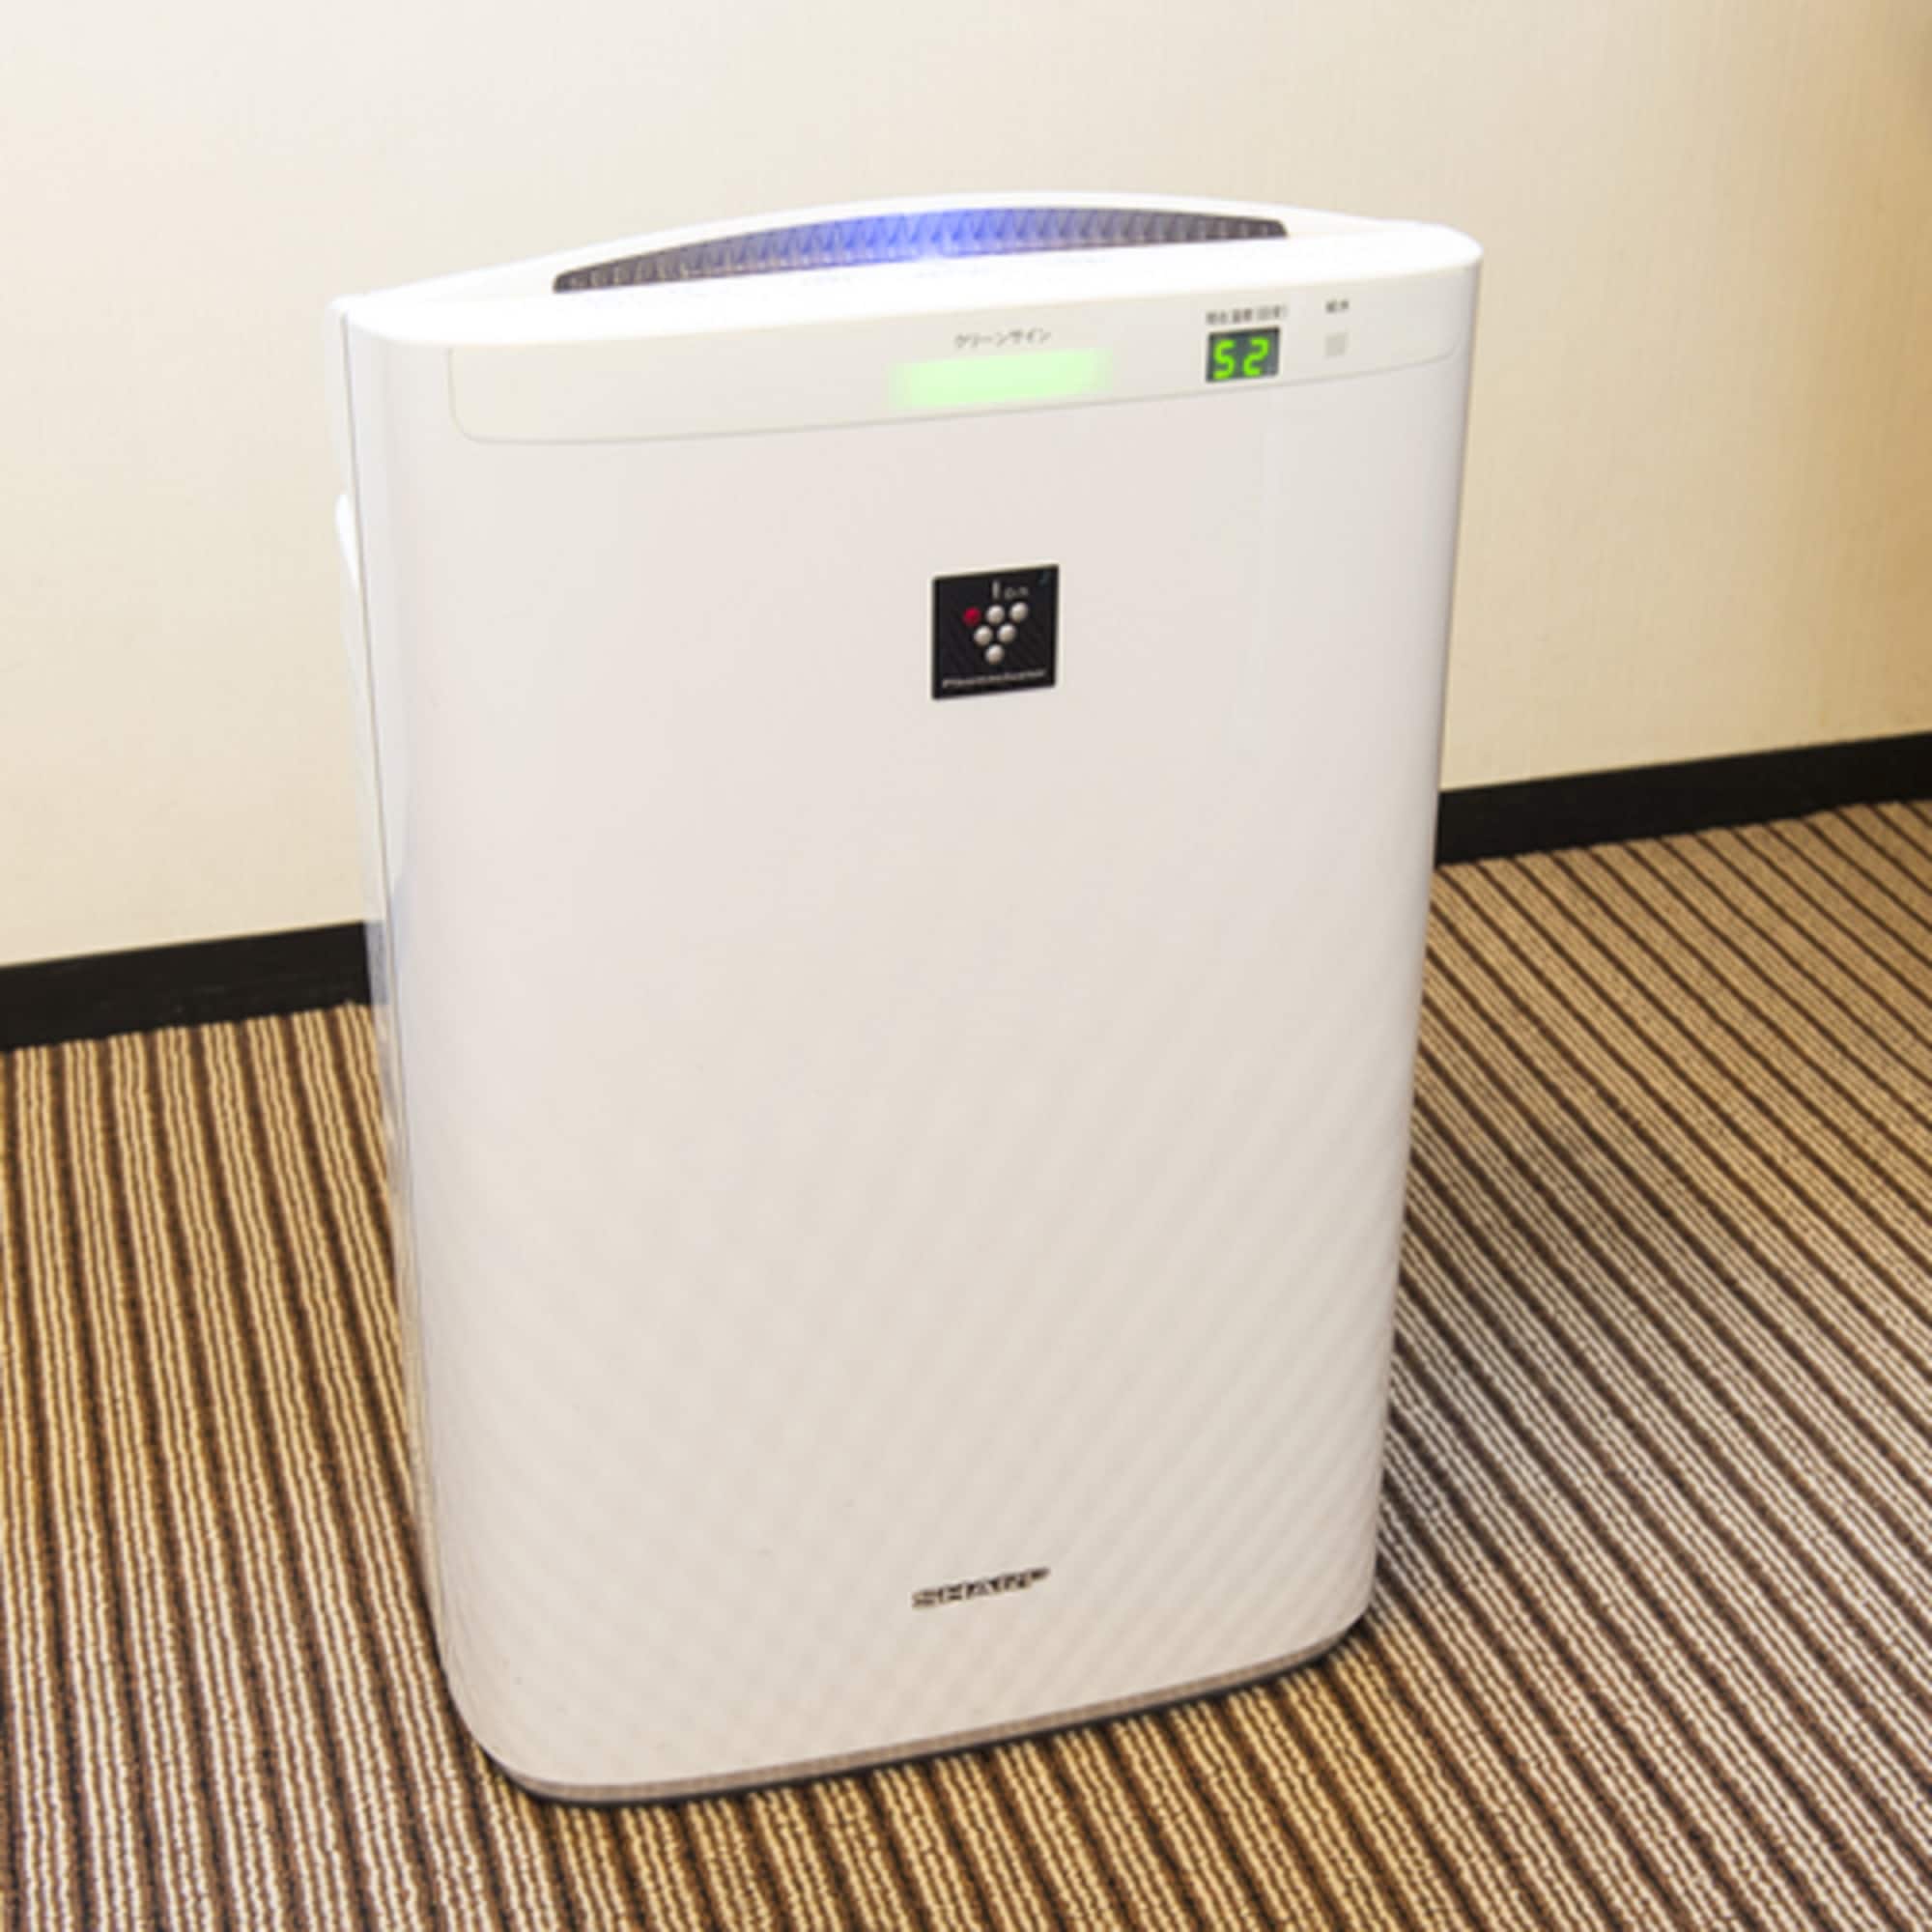 [Guest room facilities] Air purifier with humidifying function (image)